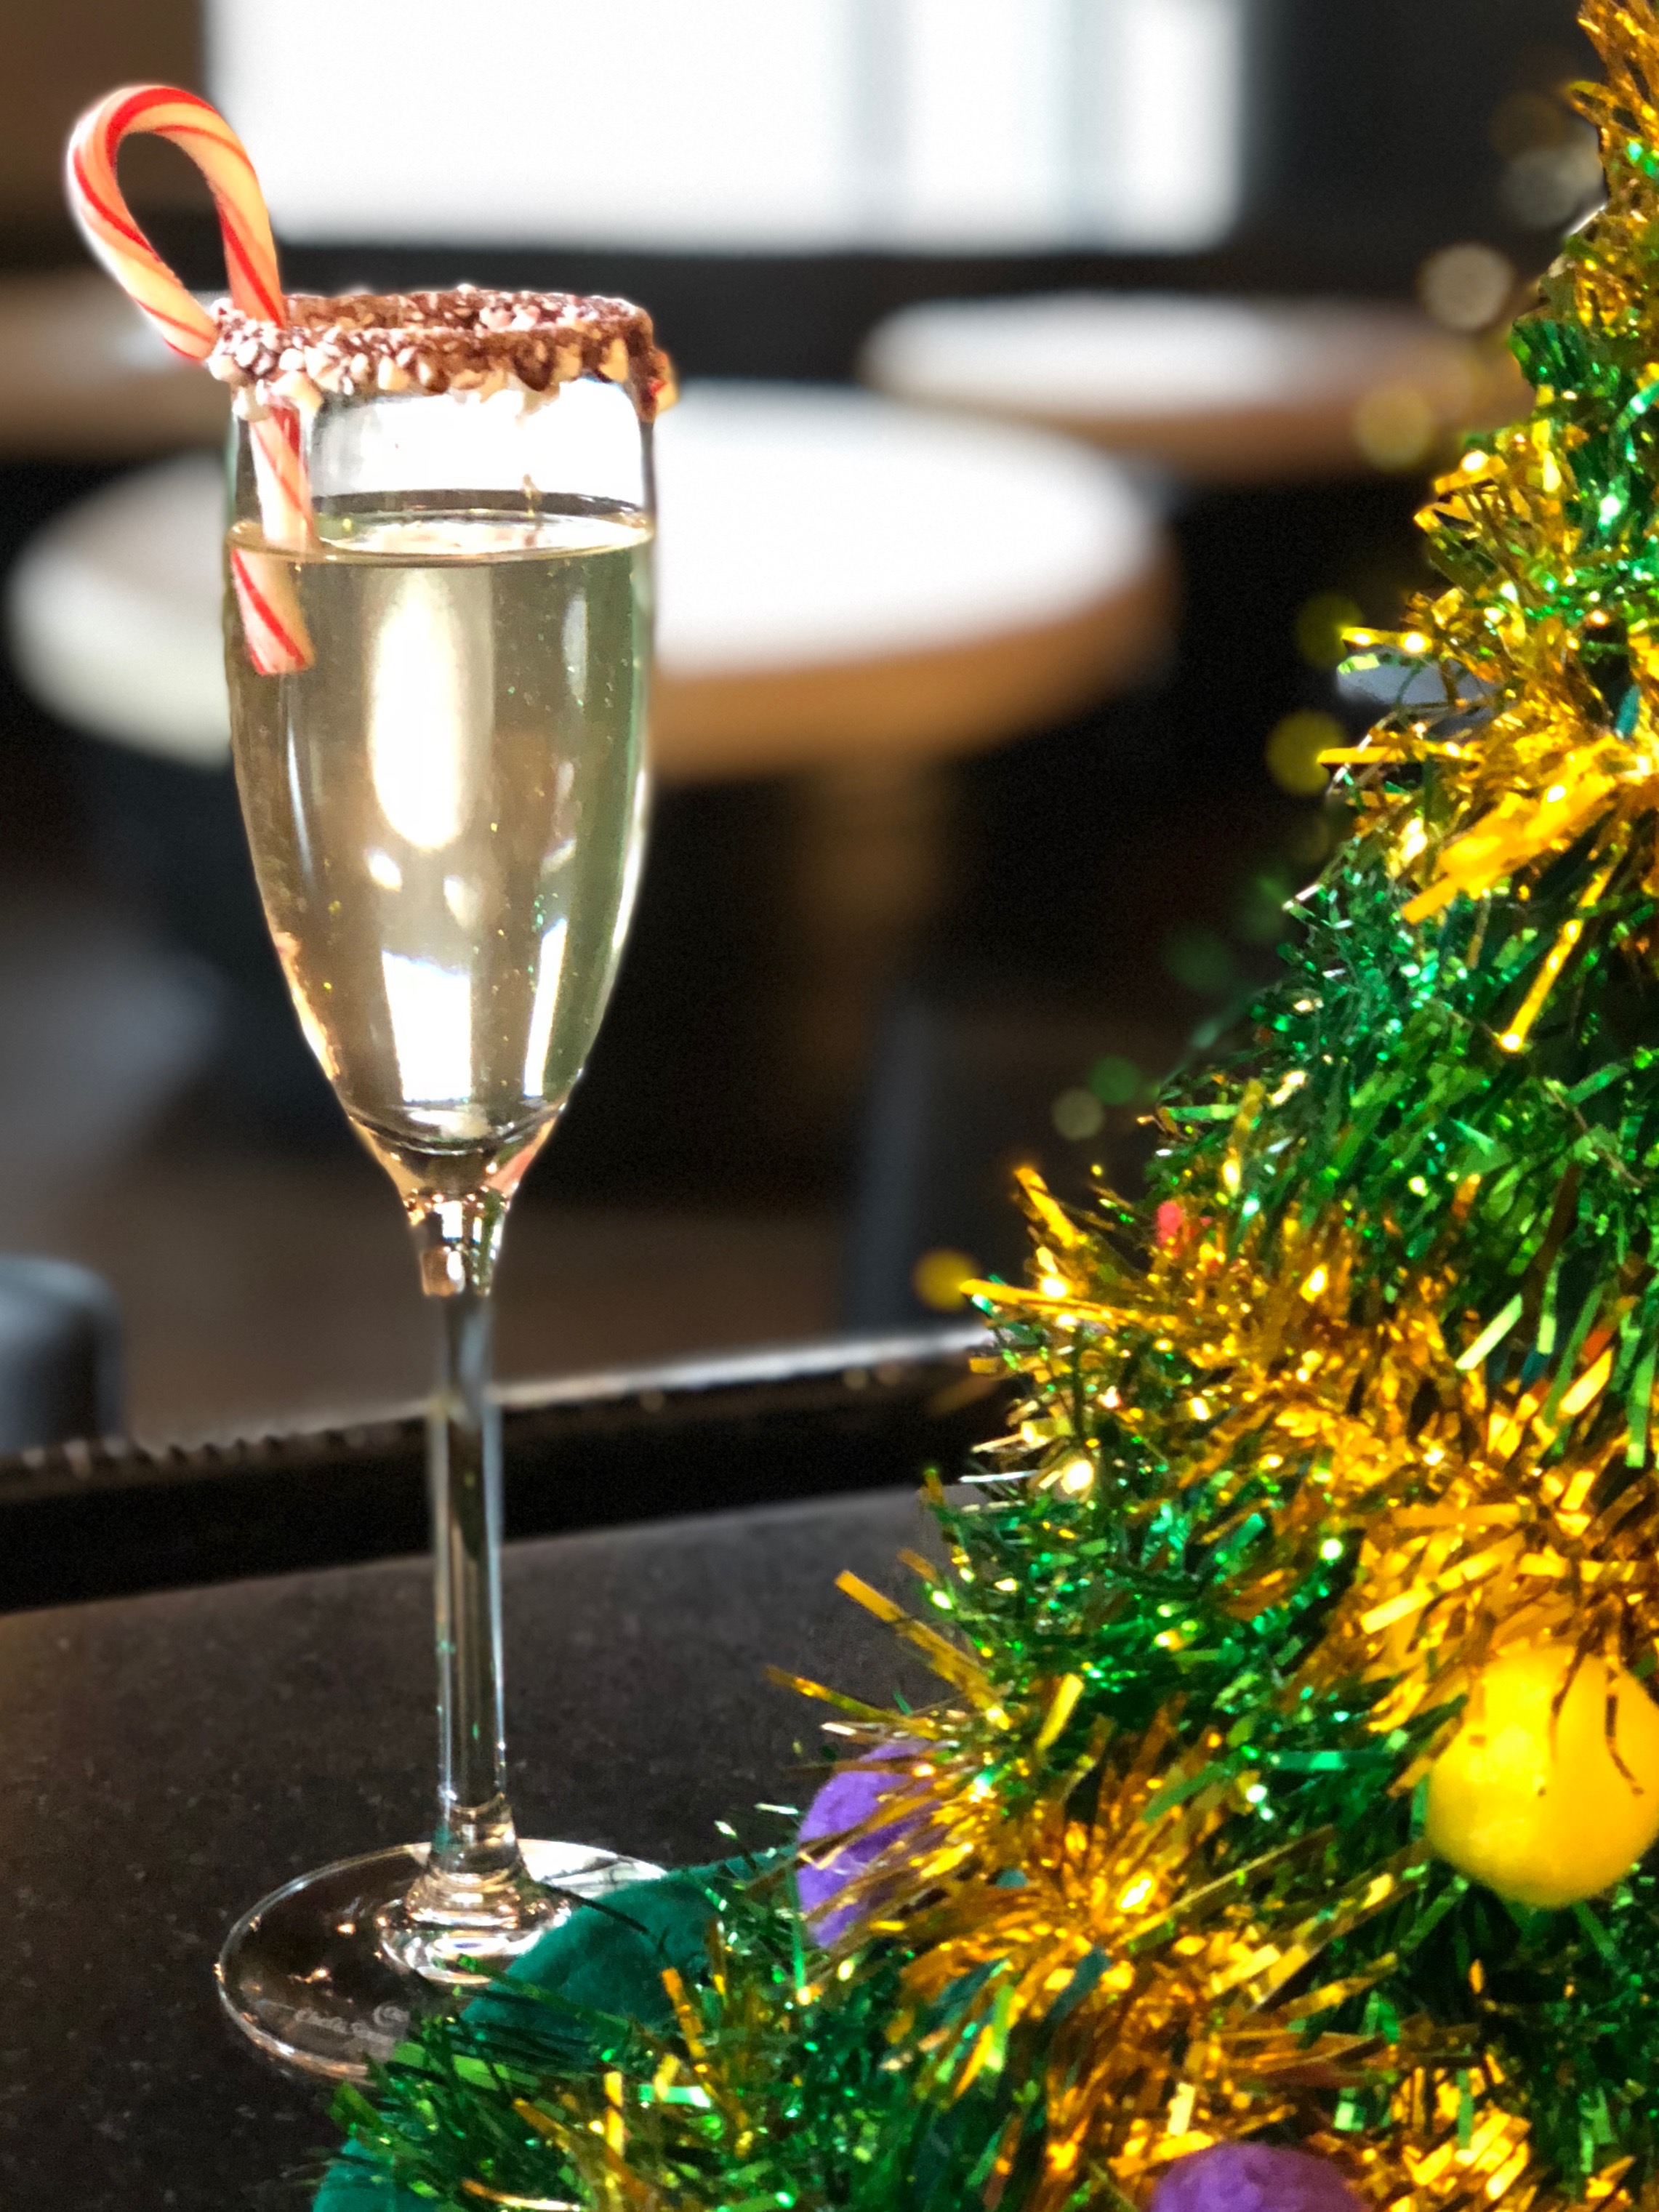 Celebrate National Champagne Day and New Year’s Eve with STK Atlanta